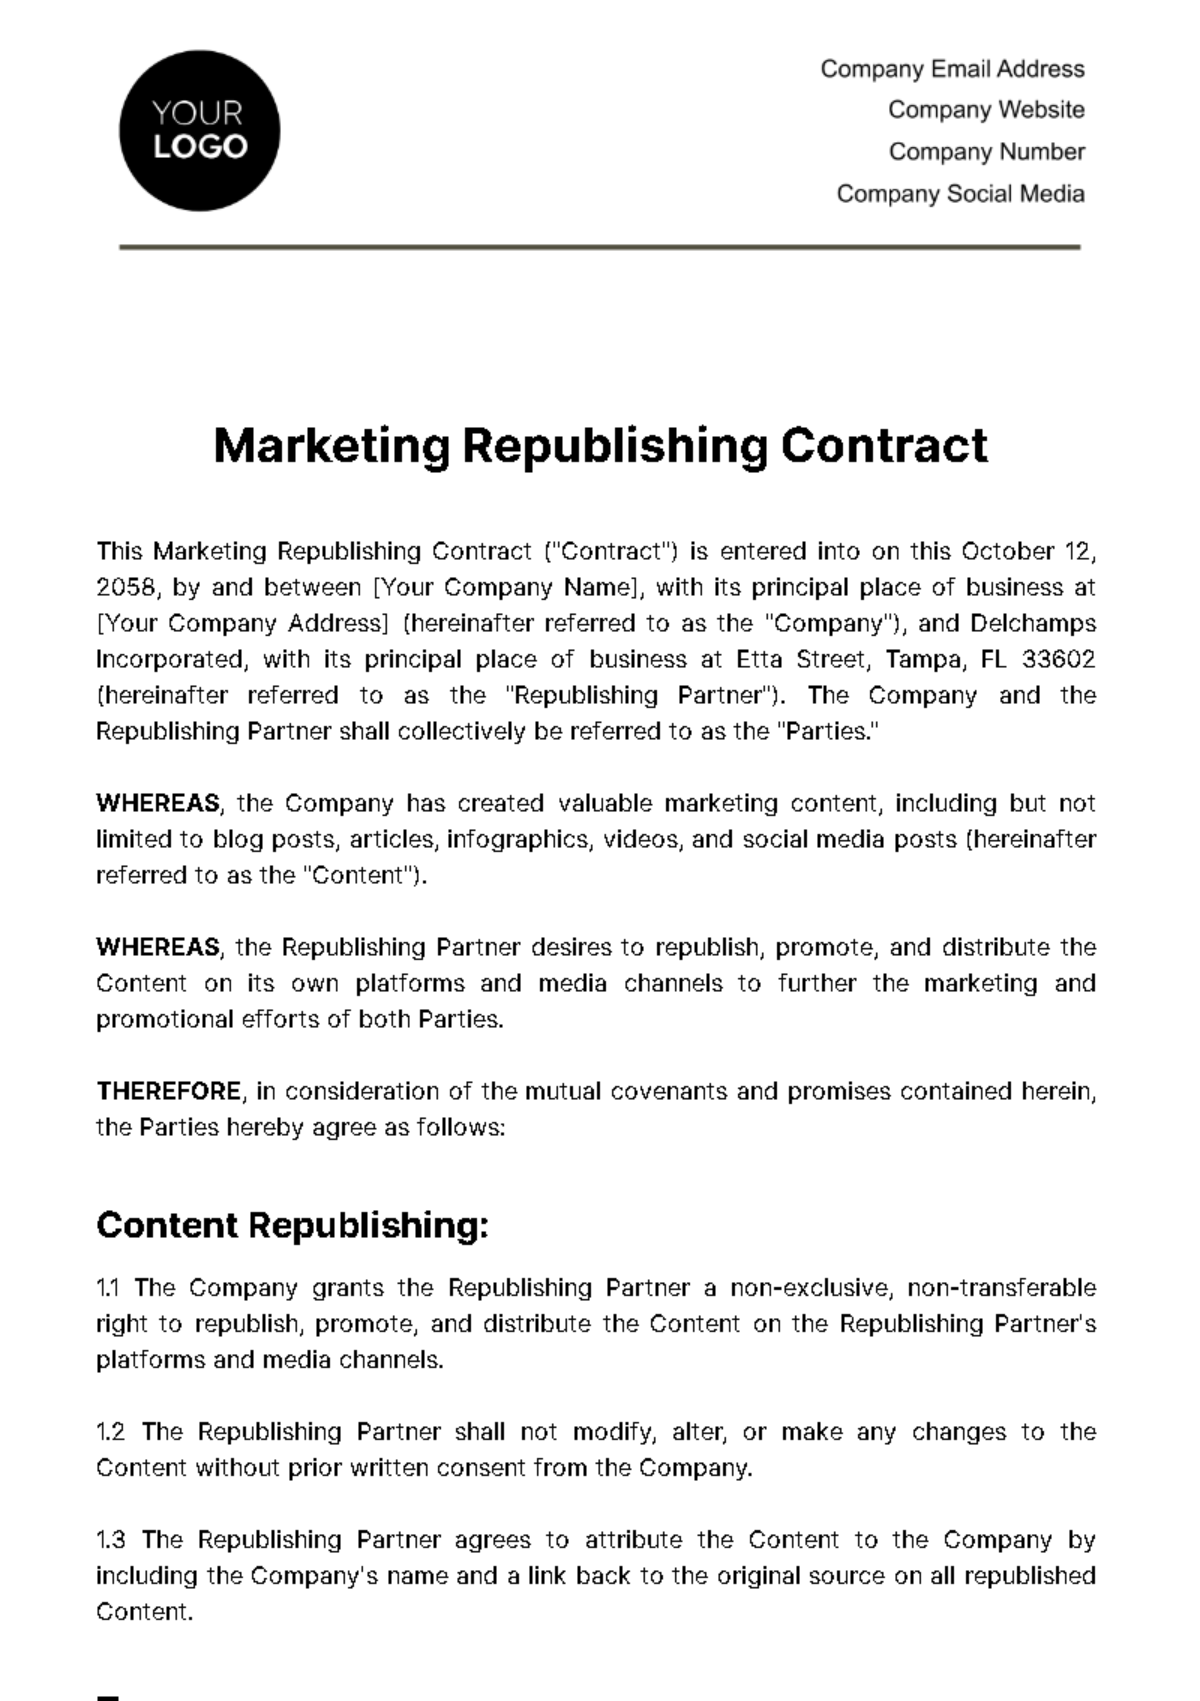 Free Marketing Republishing Contract Template